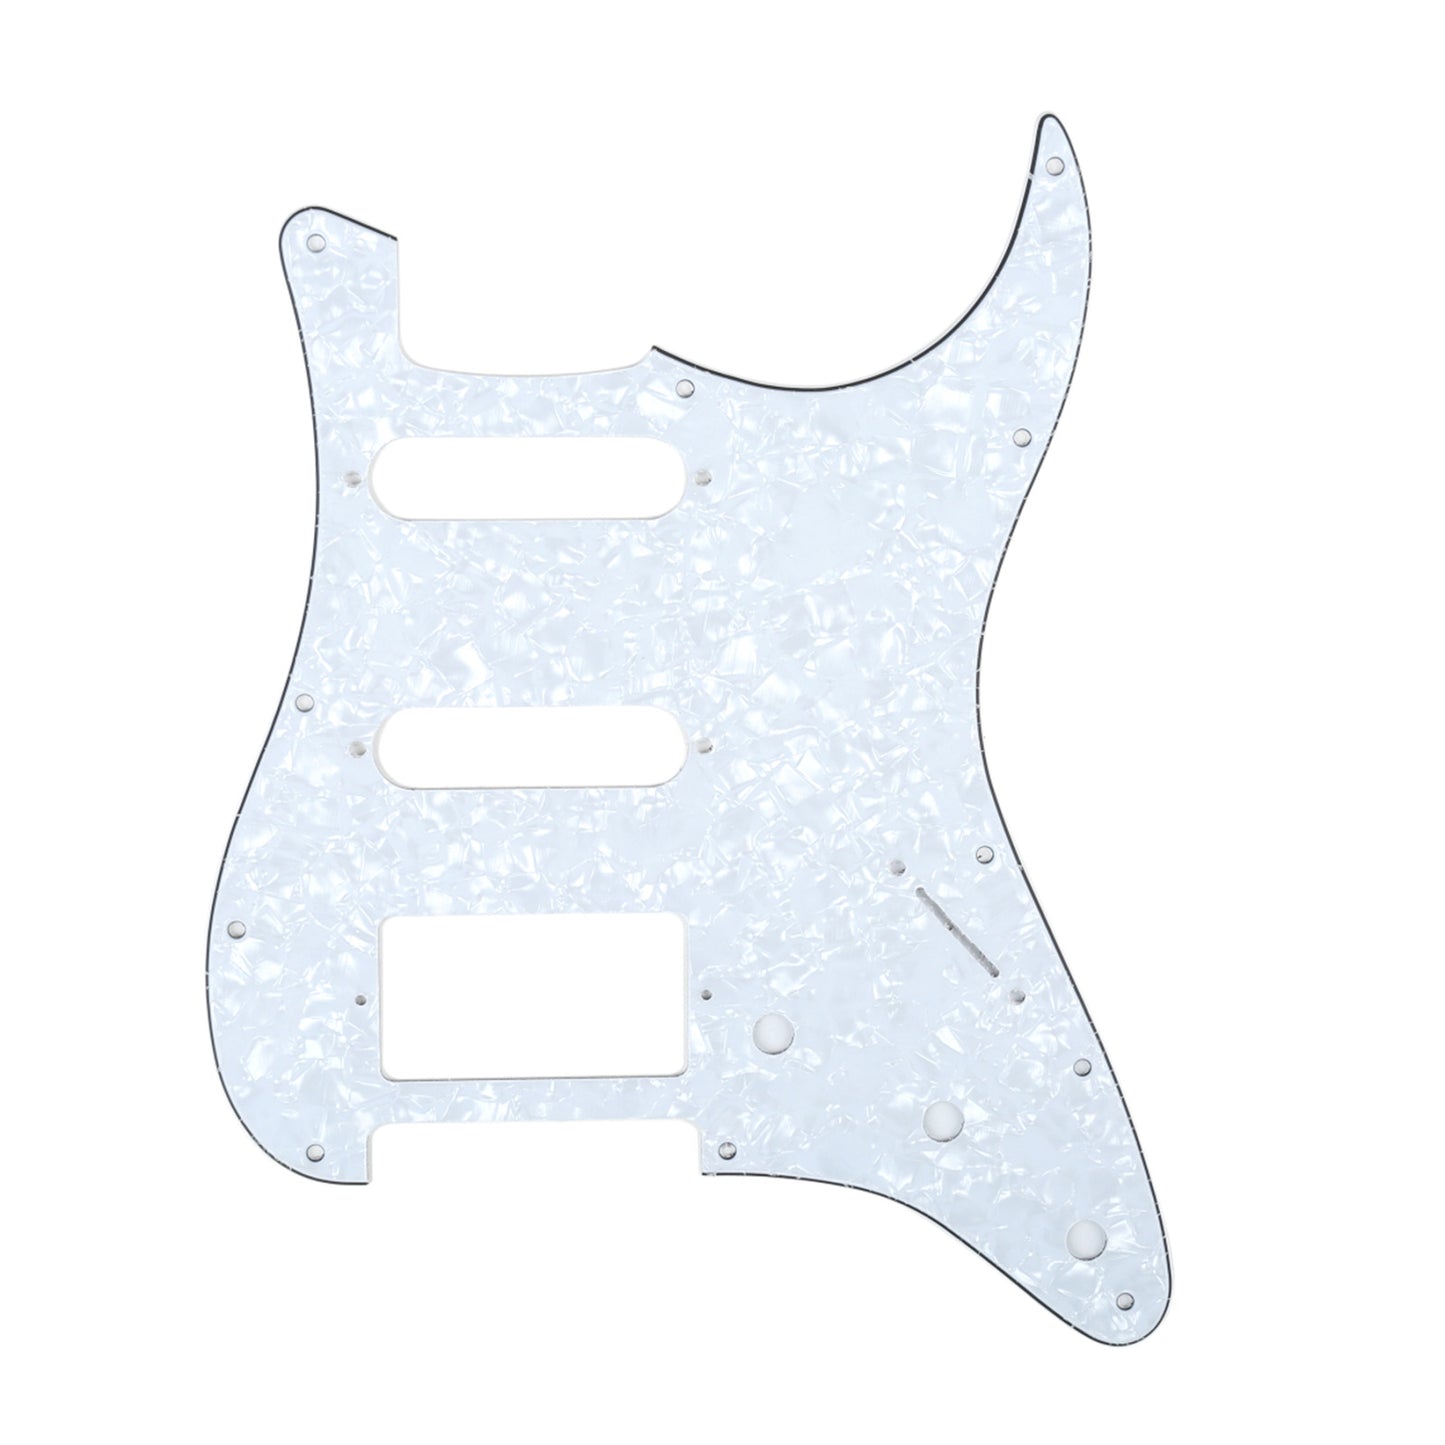 Musiclily HSS 11 Hole Guitar Strat Pickguard for Fender USA/Mexican Made Standard Stratocaster Modern Style,4Ply White Pearl